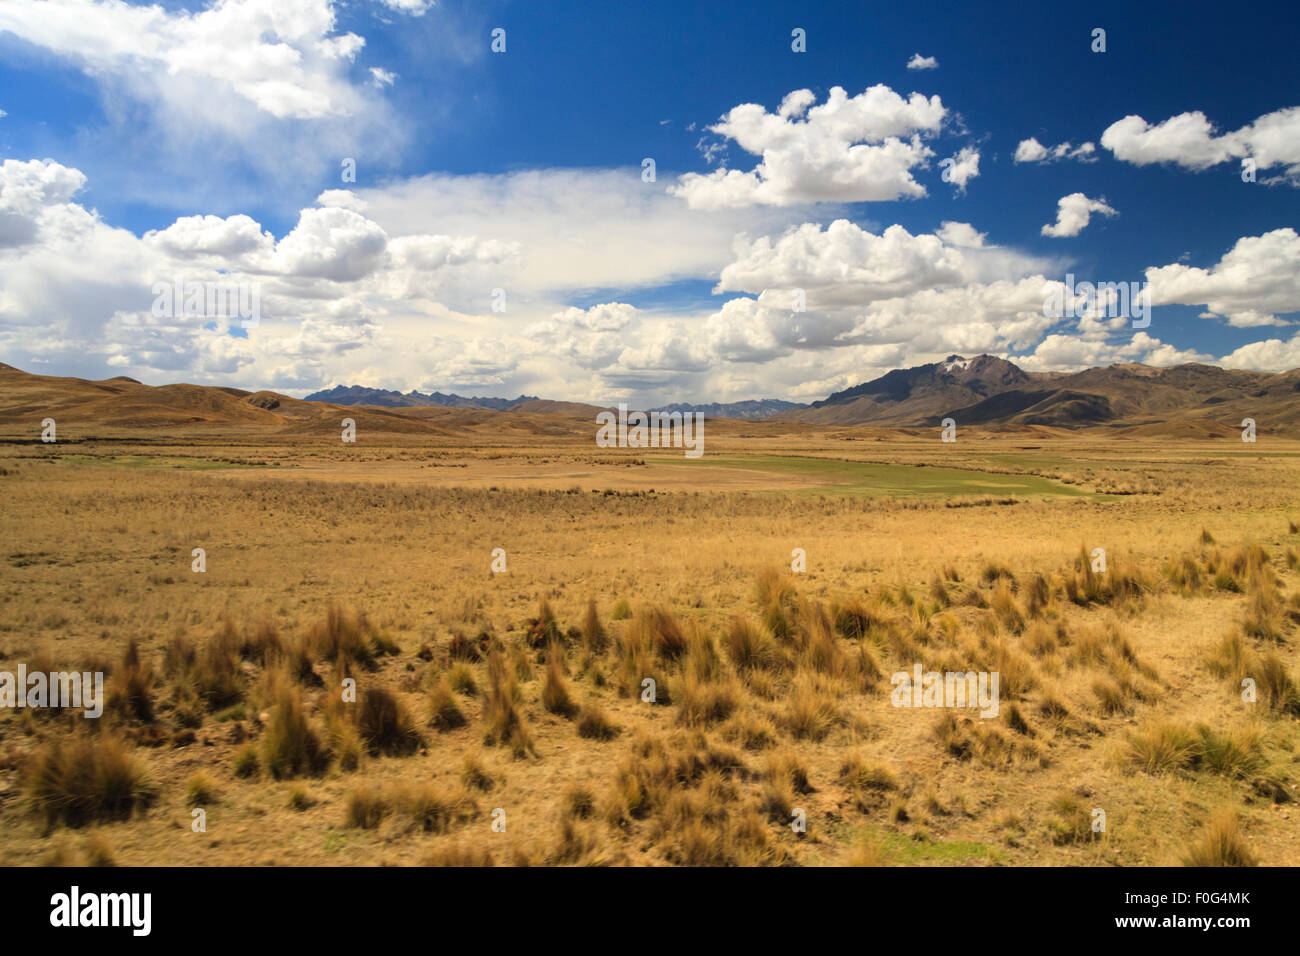 Landscape of the Andes in the Peruvian Highlands between Cusco and Puno Stock Photo